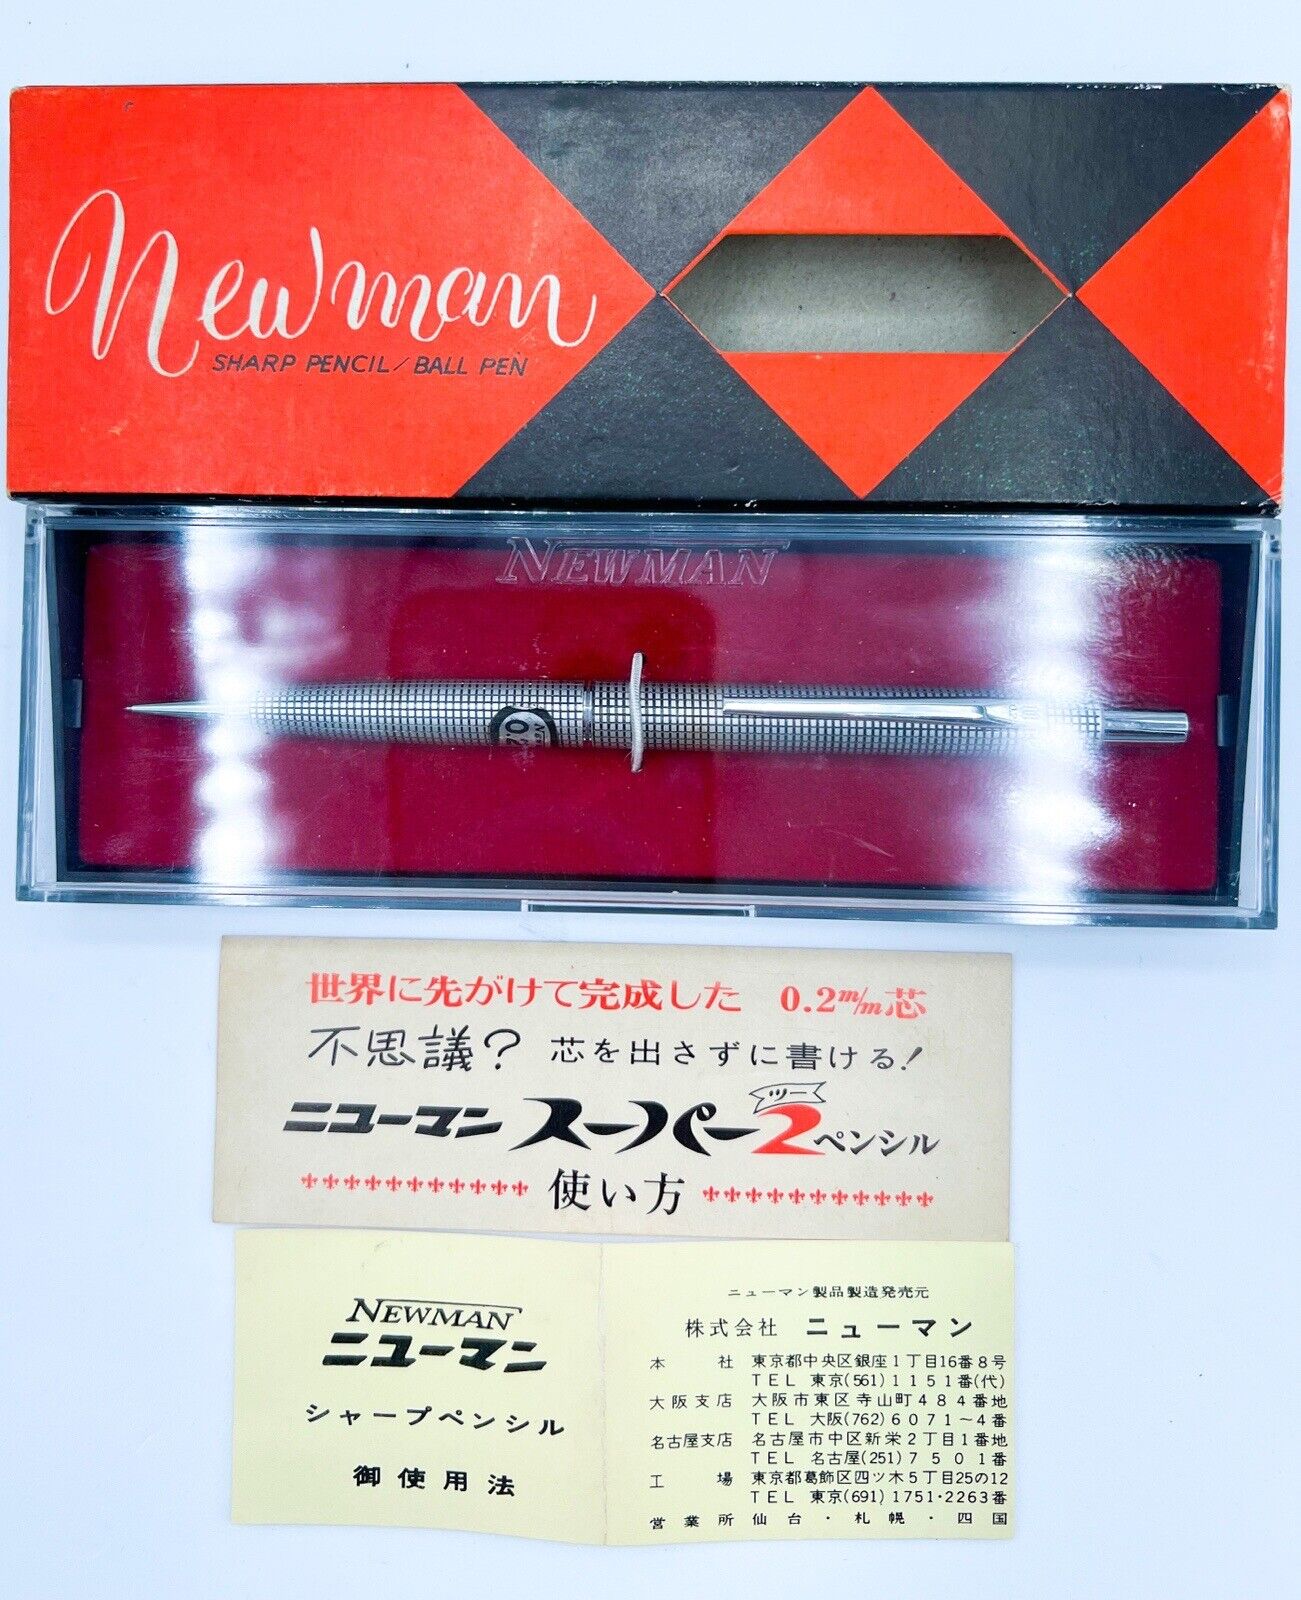 NOS 1st 0.2mm Mechanical Pencil In The World Newman Full Metal Sliding 